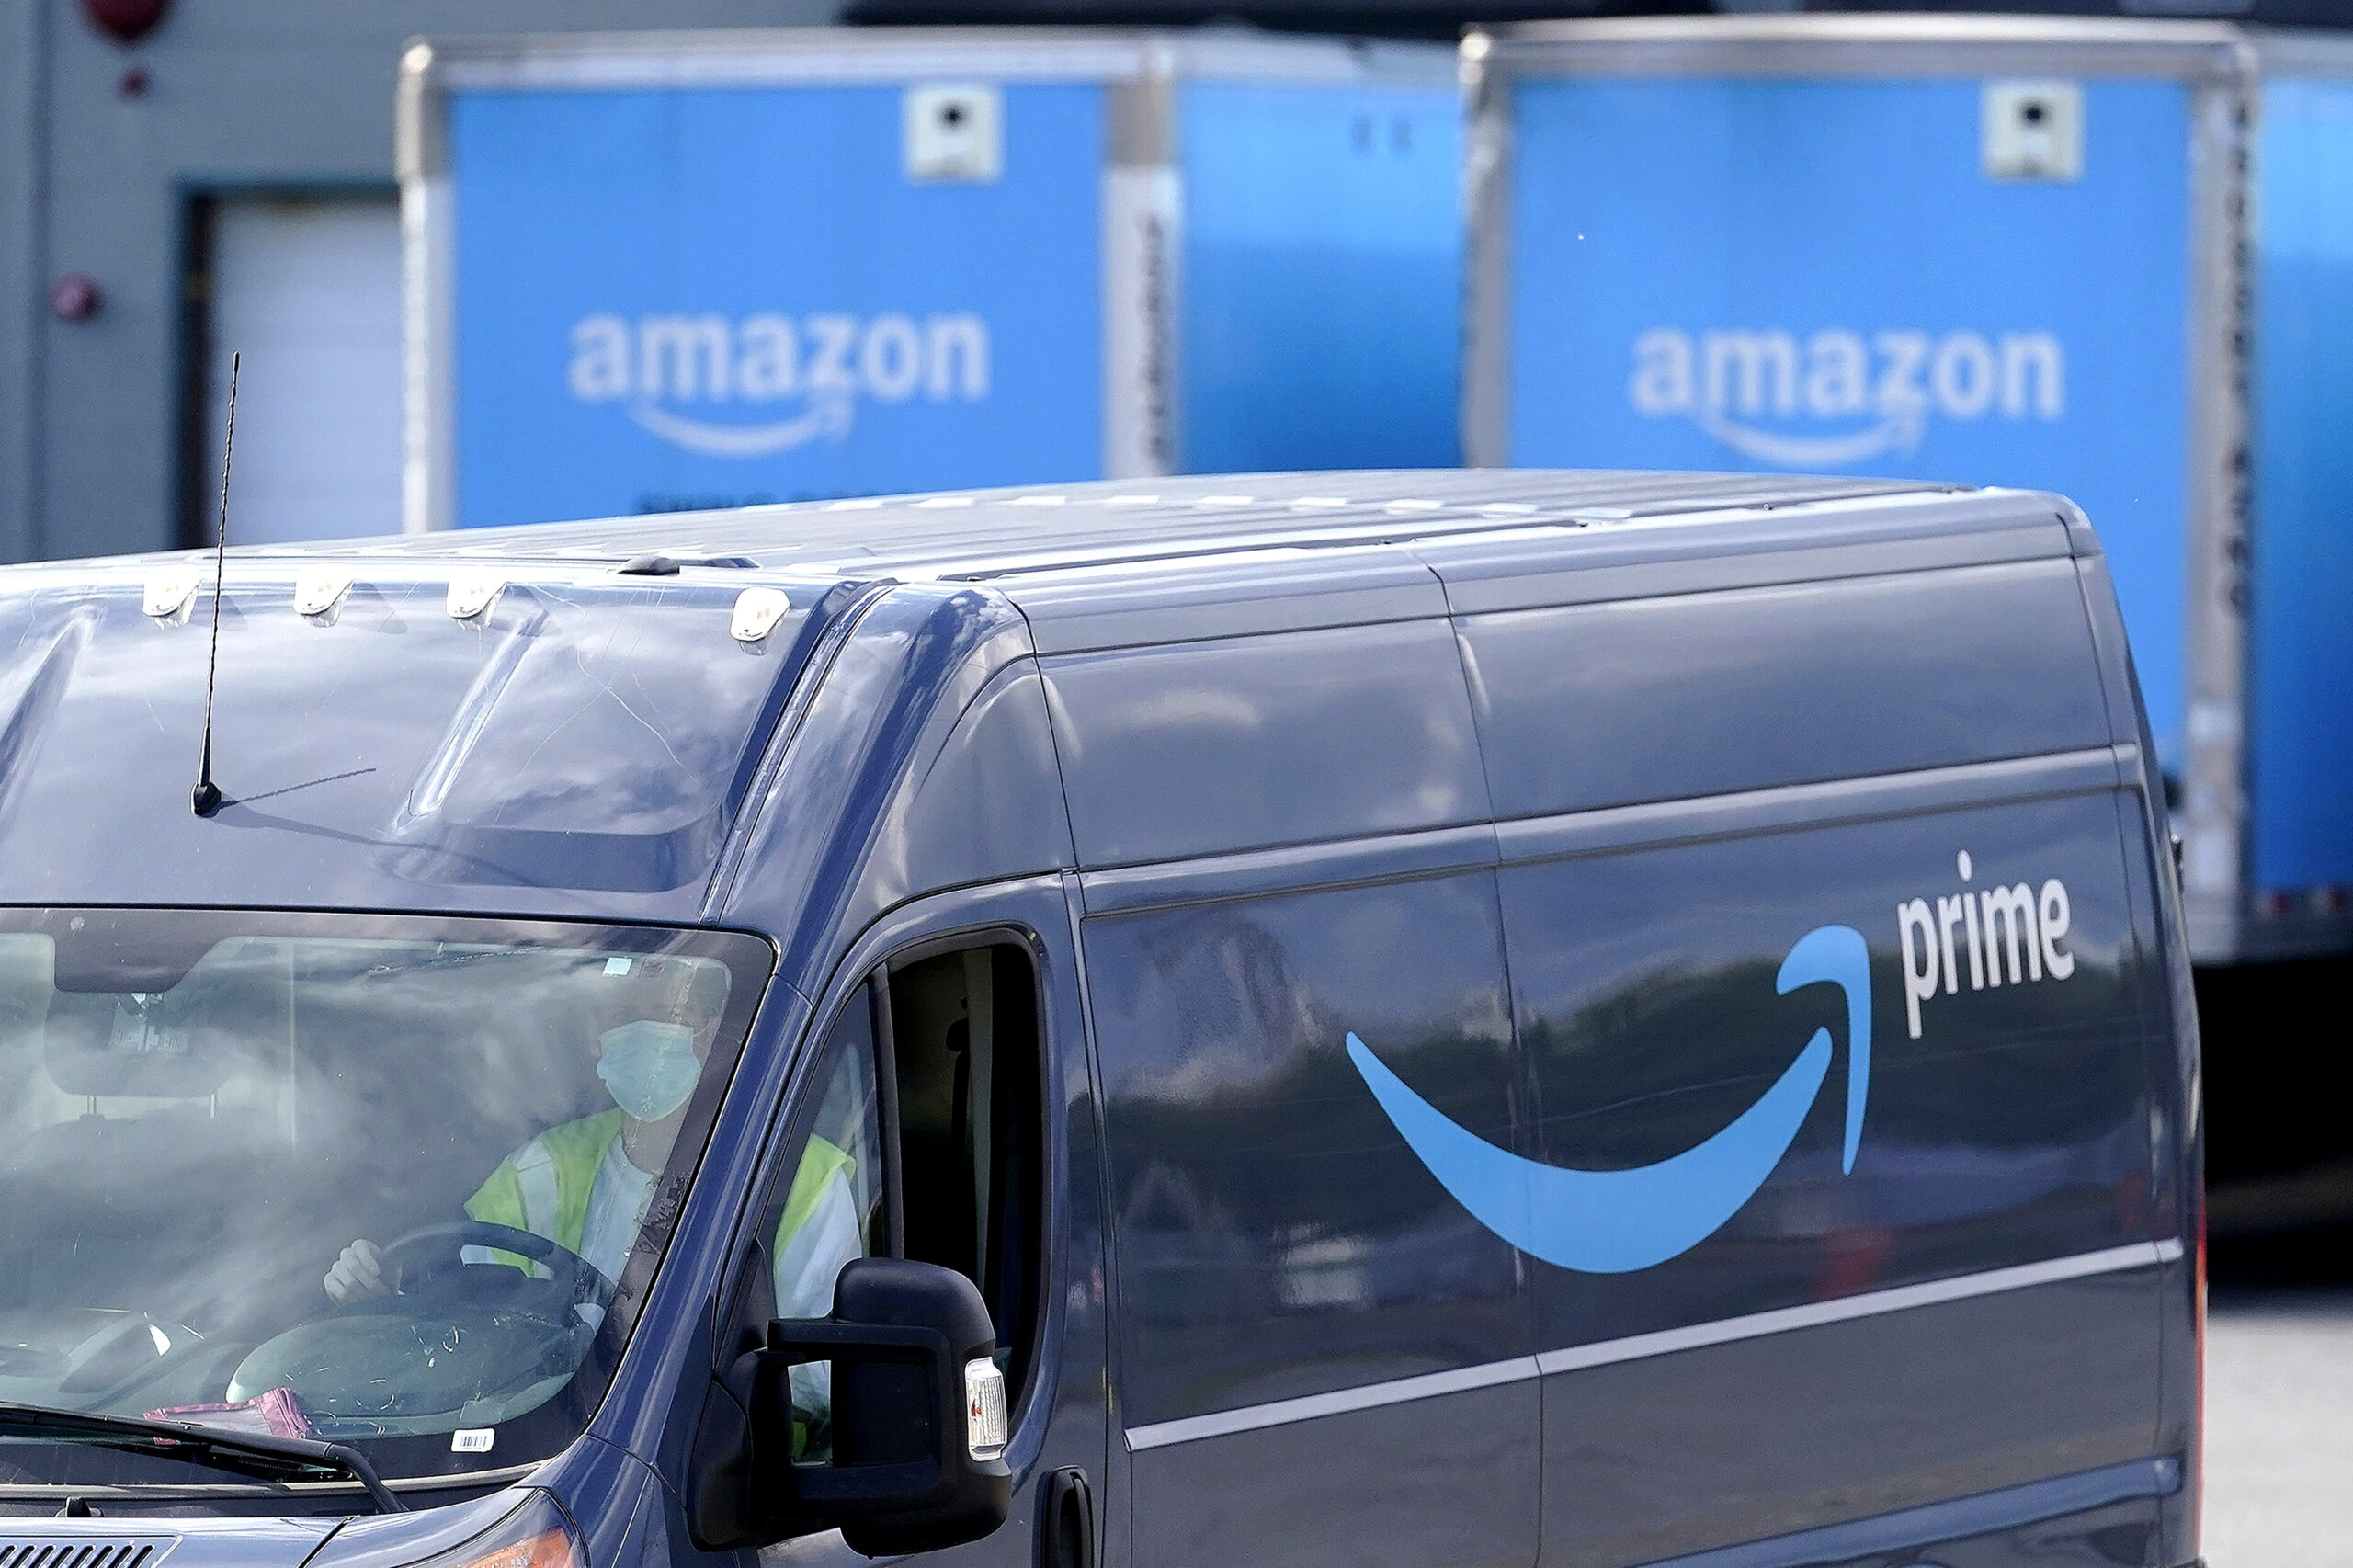 FILE - An Amazon Prime logo appears on the side of a delivery van as it departs an Amazon Warehouse location in Dedham, Mass., Oct. 1, 2020. Amazon is holding a second Prime Day-like shopping event in October 2022, making it the latest major retailer to offer holiday deals earlier to entice cautious consumers struggling with tighter budgets. (AP Photo/Steven Senne, File)